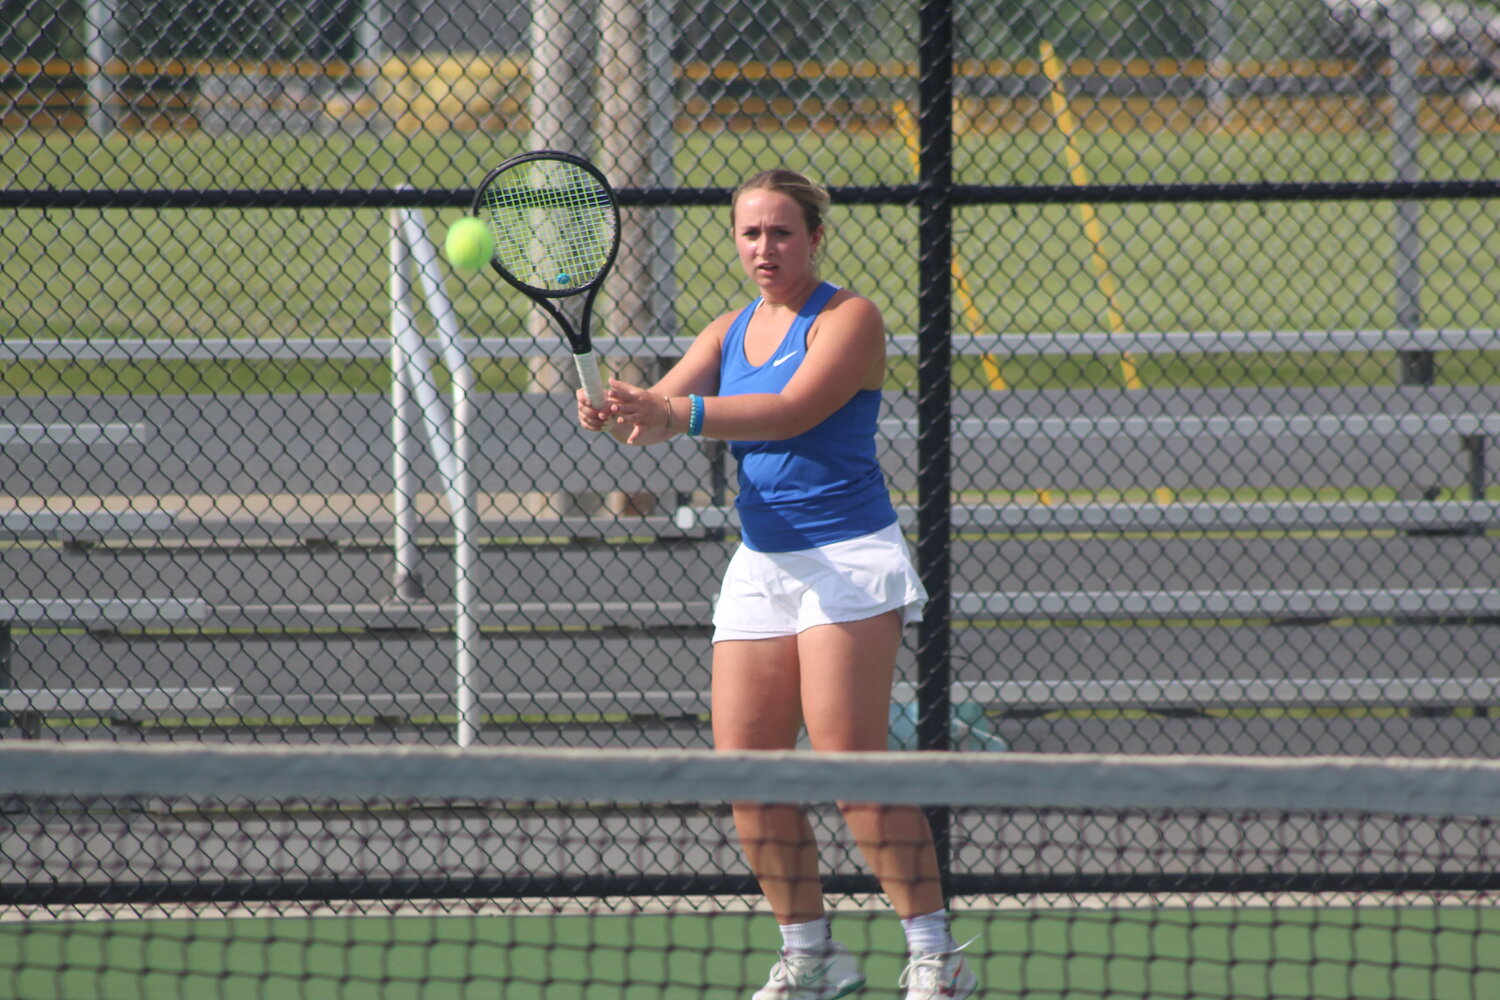 Crawfordsville's Sam Rohr has manned the 1 singles spot since her sophomore year for CHS and played her last match of her career on Tuesday.